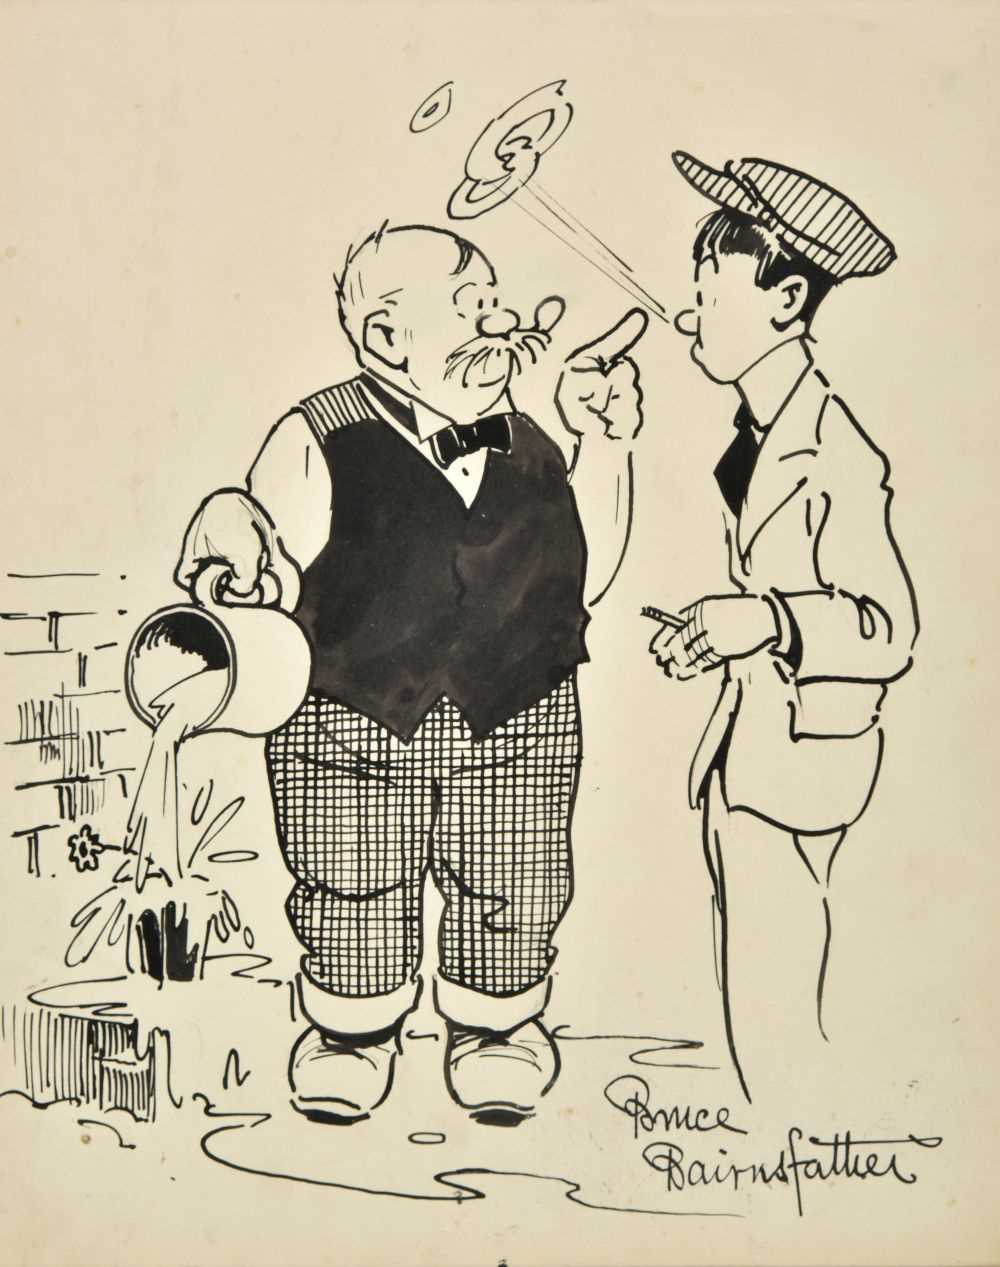 Lot 606 - Bairnsfather (Bruce, 1888-1959). Old Bill reprimanding a smoking youth